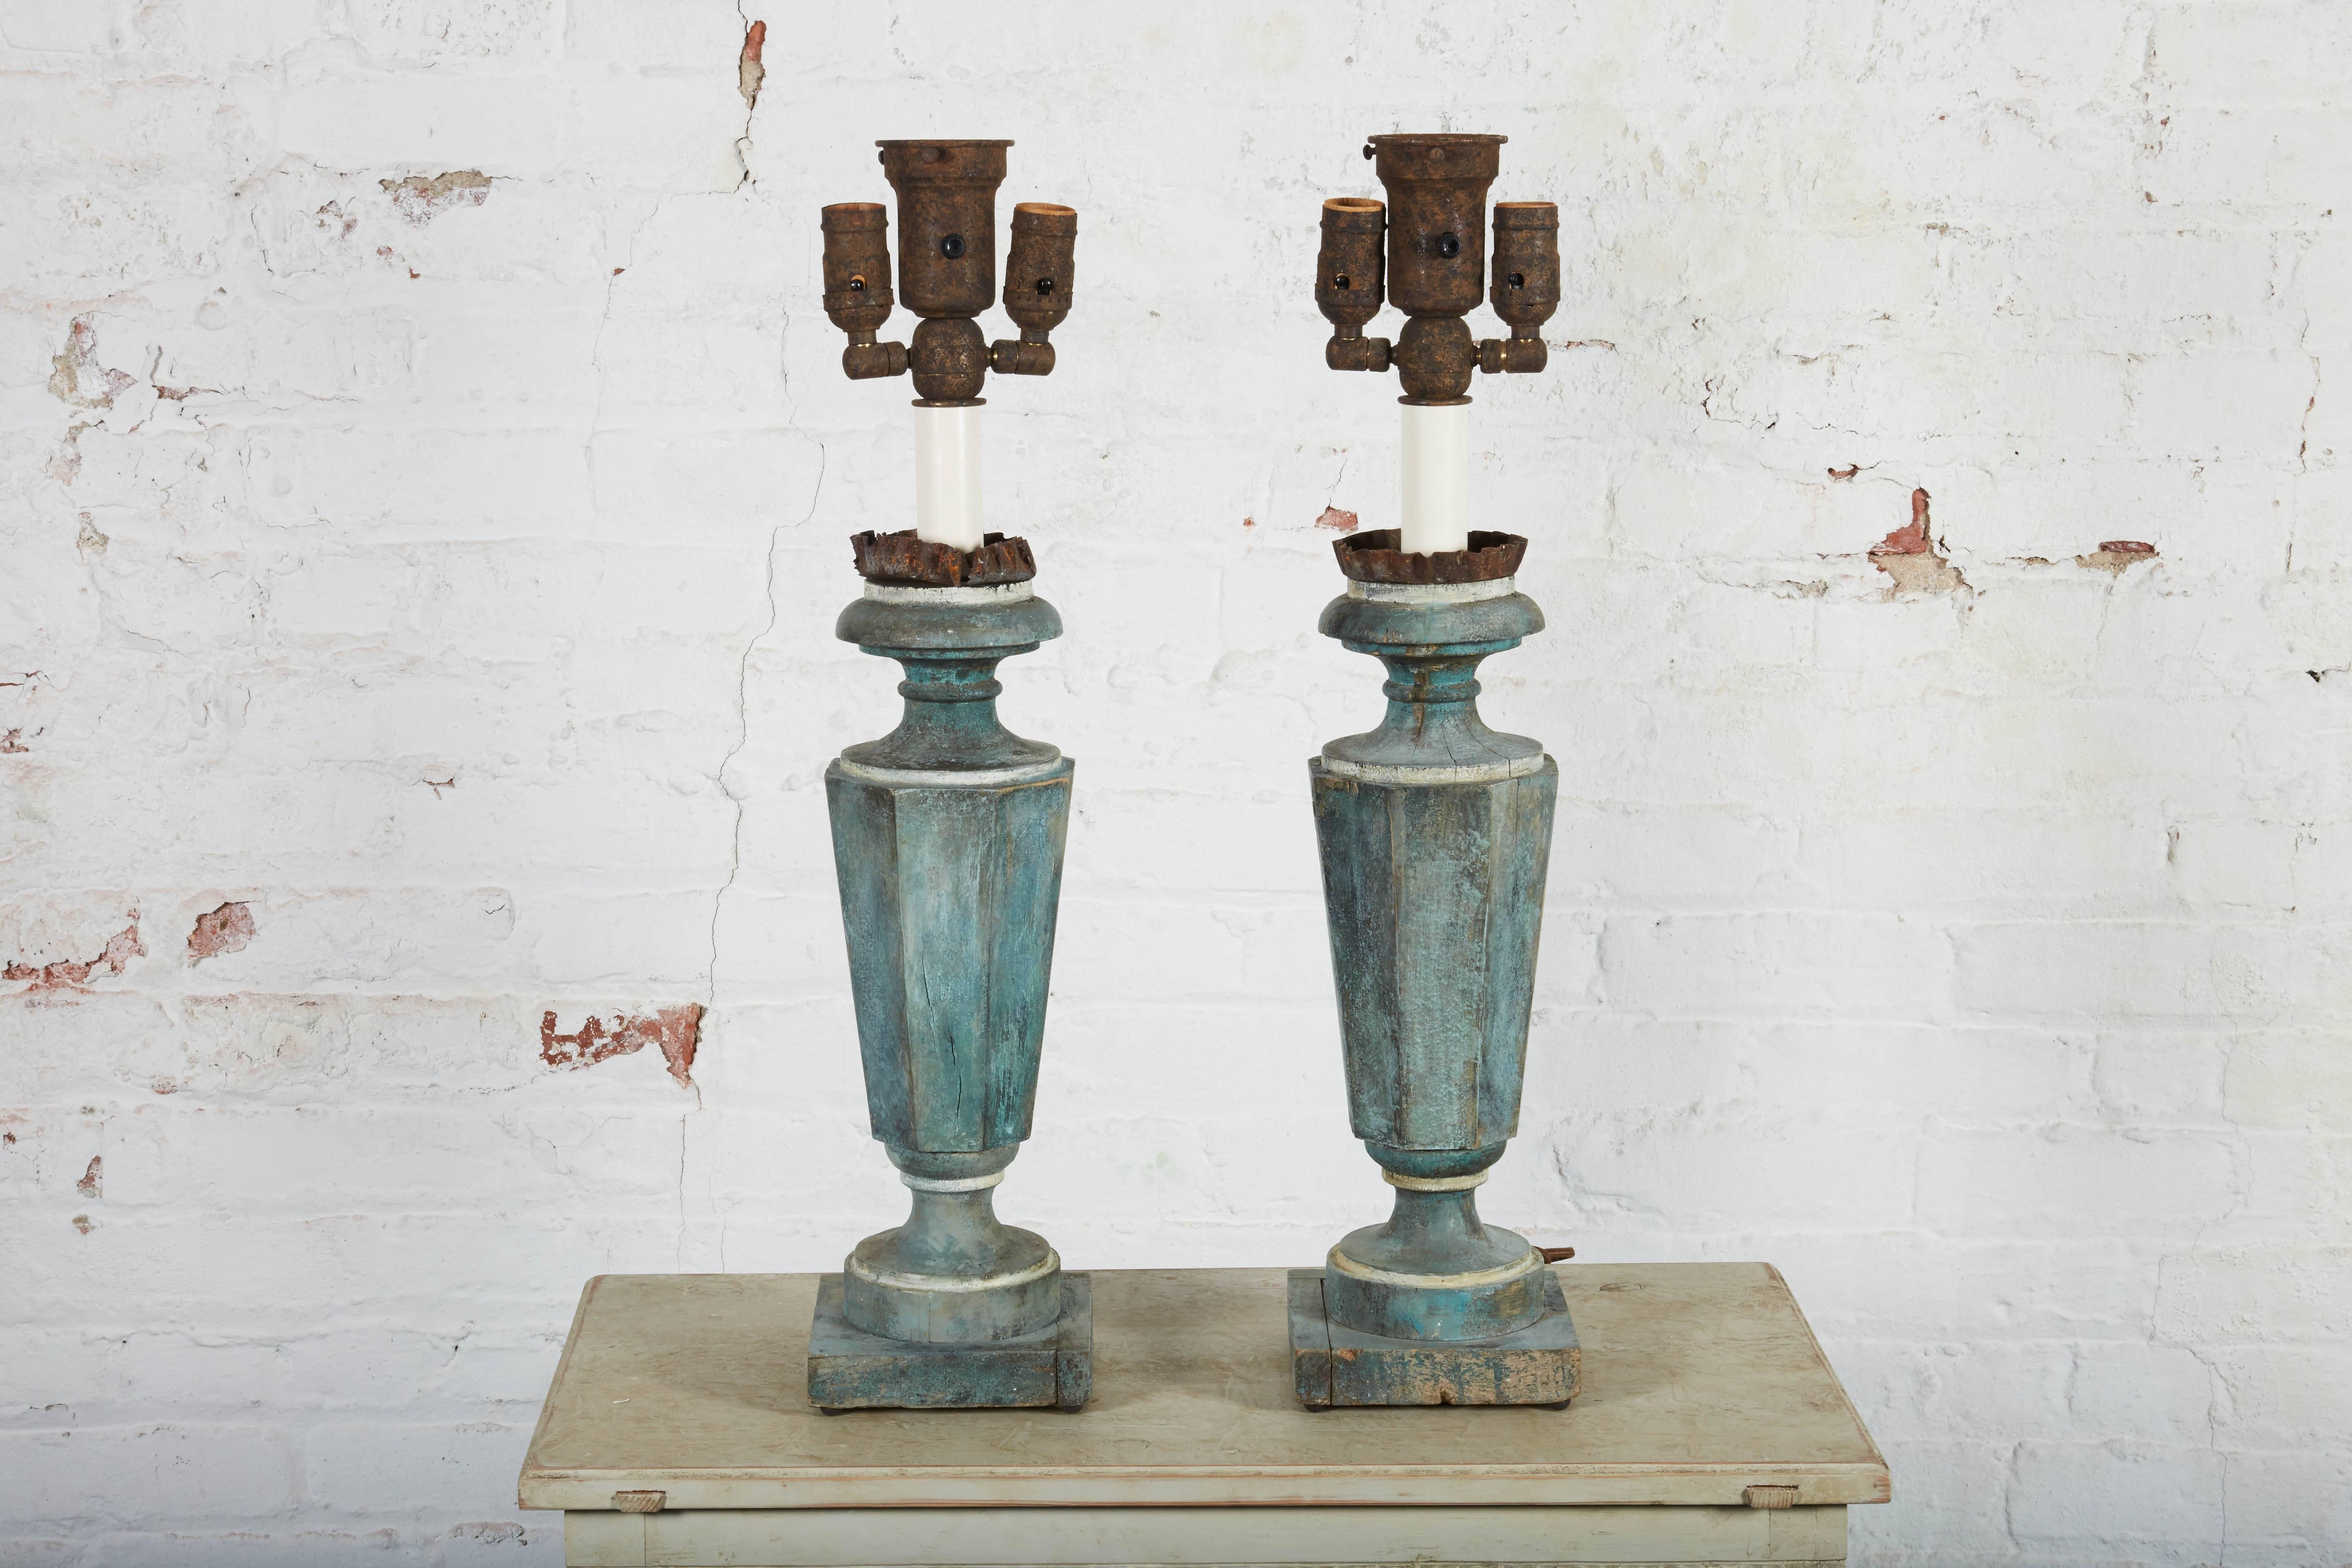 Each an antique blue-painted wood pricket Stand converted into a three-light lamps.